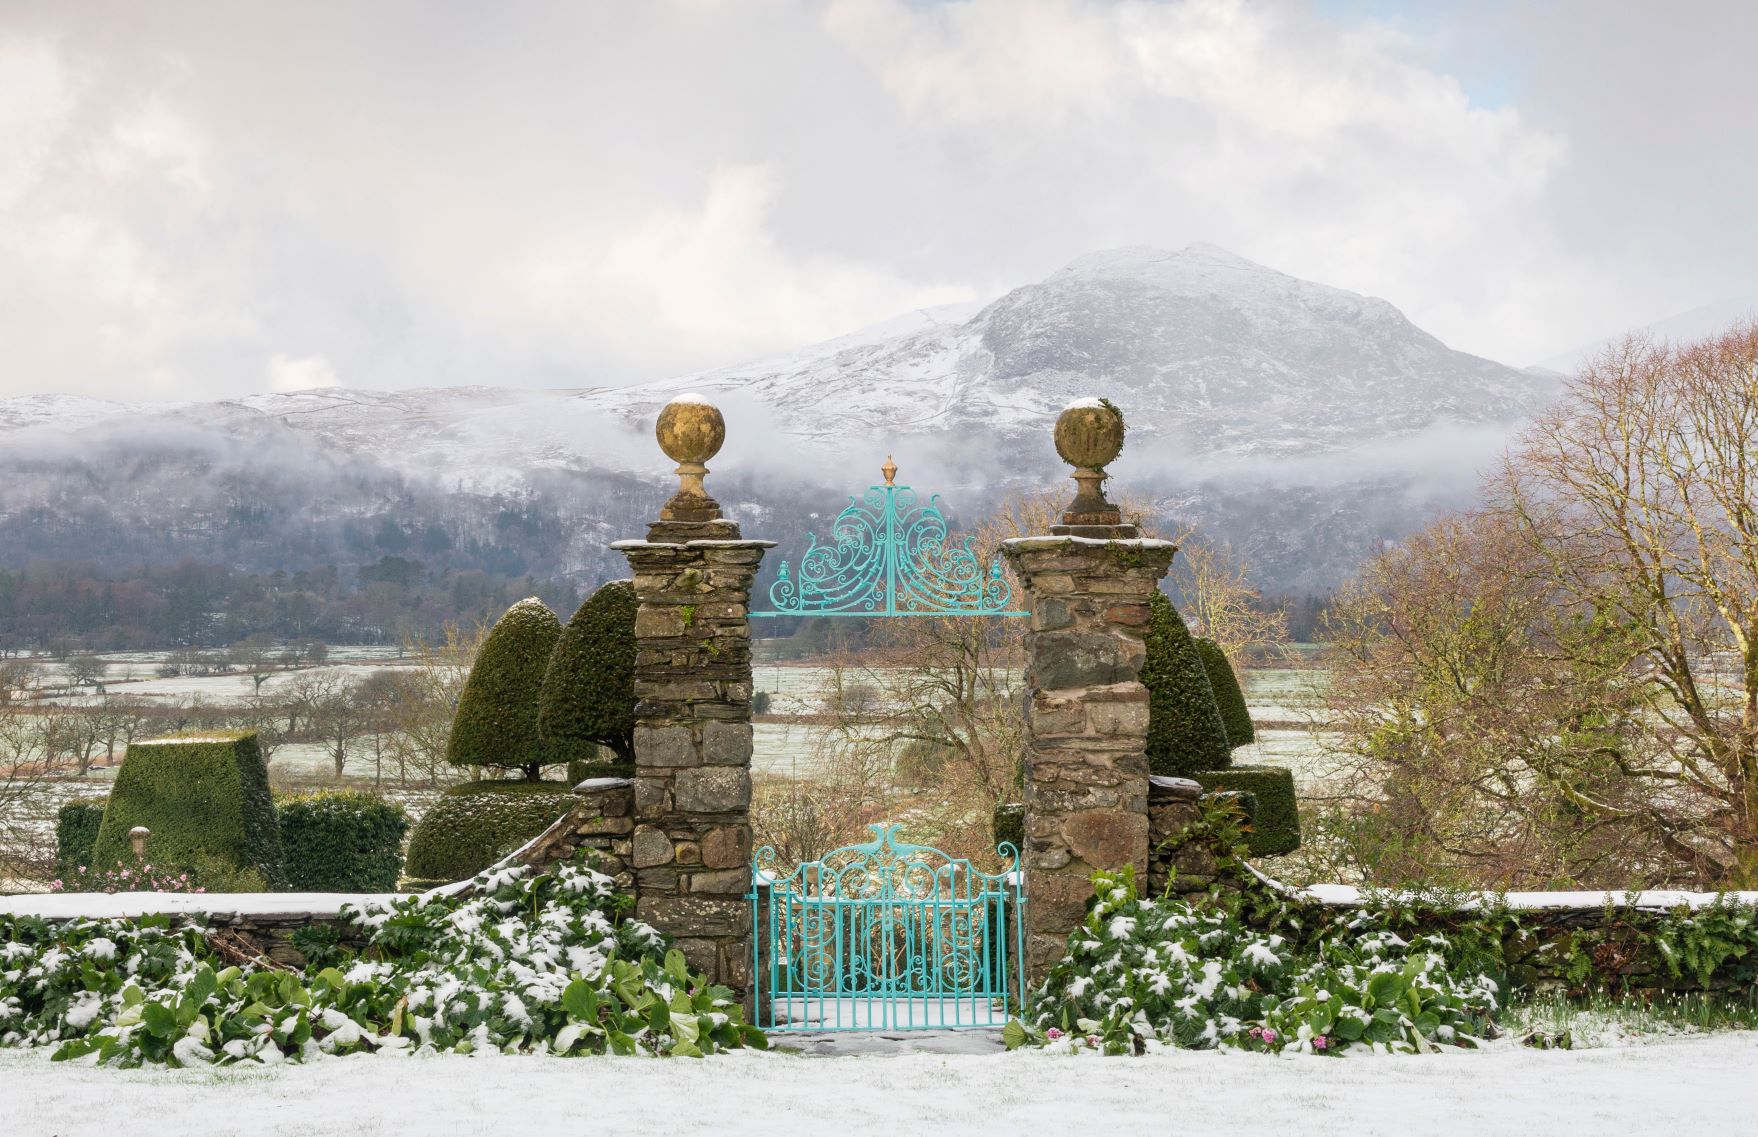 Borrowed Landscape. The garden at Plas Brondanw, Llanfrothen, Gwynedd, in Wales, UK, with a view of Snowdonia. Open to the Public. Photo © Richard Bloom. A borrowed landscape is an element of a garden composition that lies beyond the physical garden confines but which is brought into focus as part of the overall visual experience.